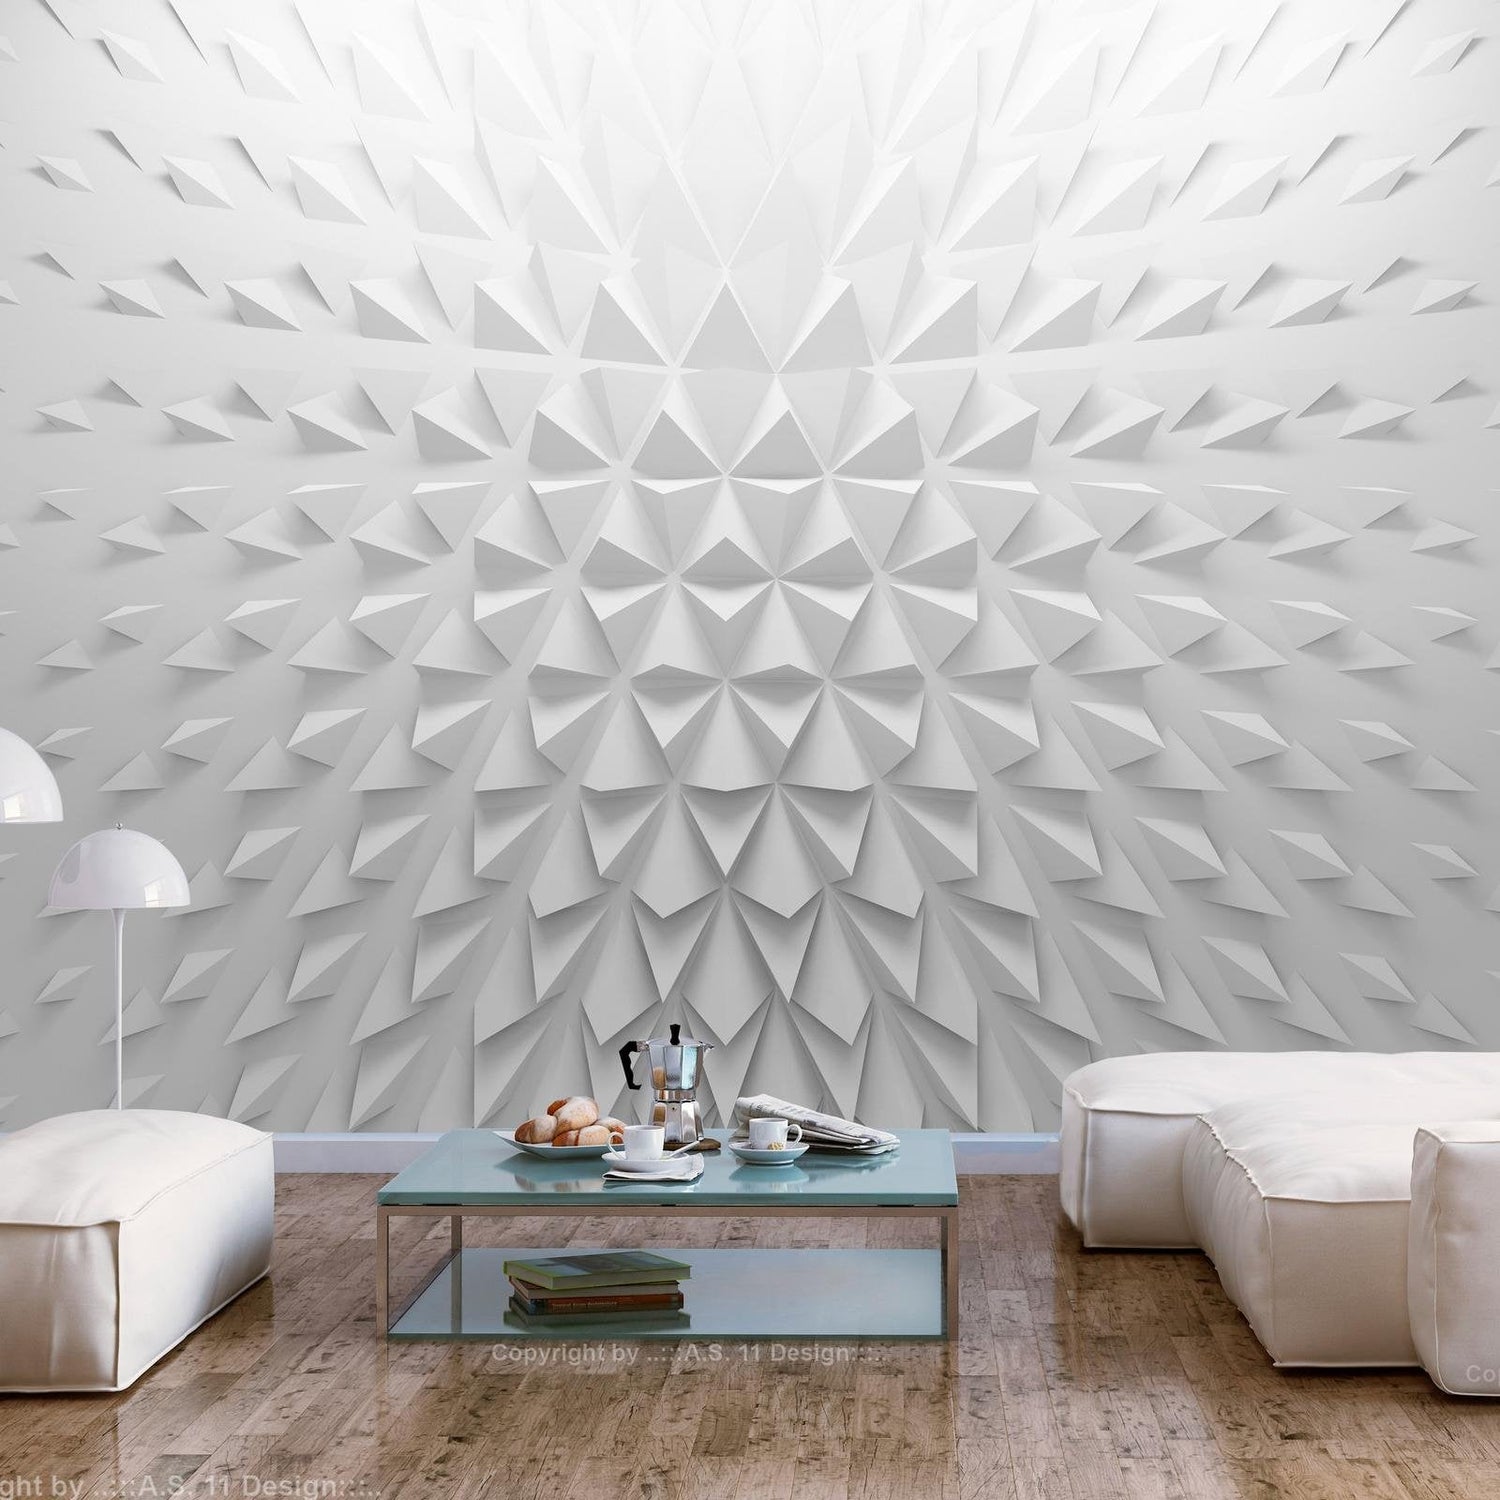 Peel and stick wall mural - Tetrahedrons-TipTopHomeDecor